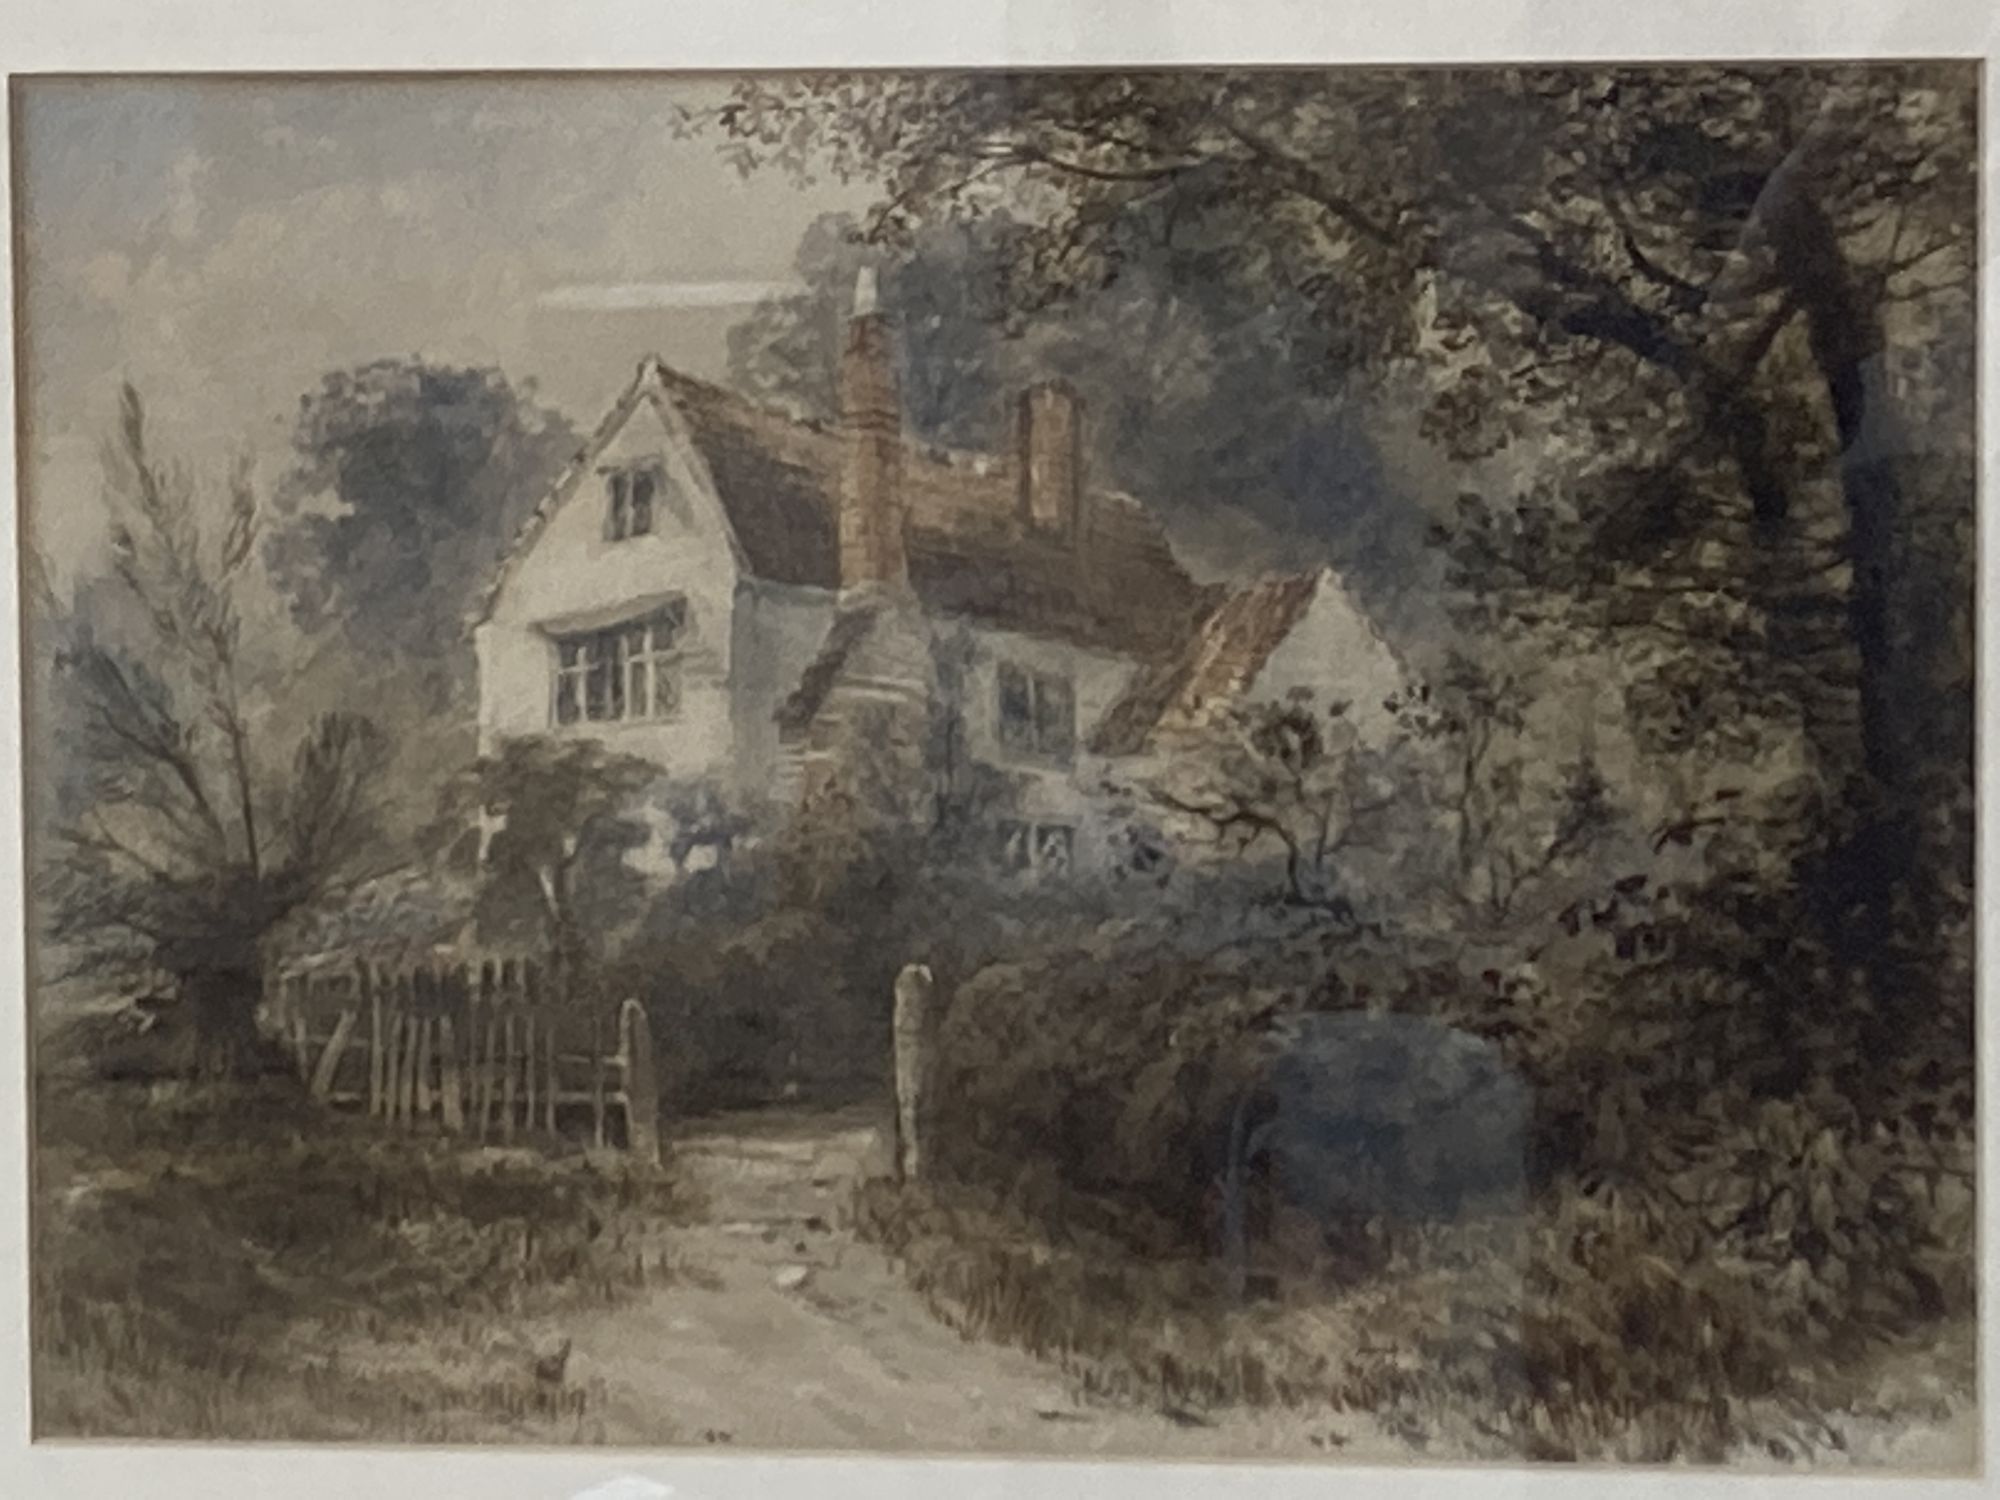 C. Sharpe (c.19th), two watercolours, Llantdry, Monmouthshire and Southend, Eltham, one signed and dated 48, 23 x 36cm and 22 x 31cm